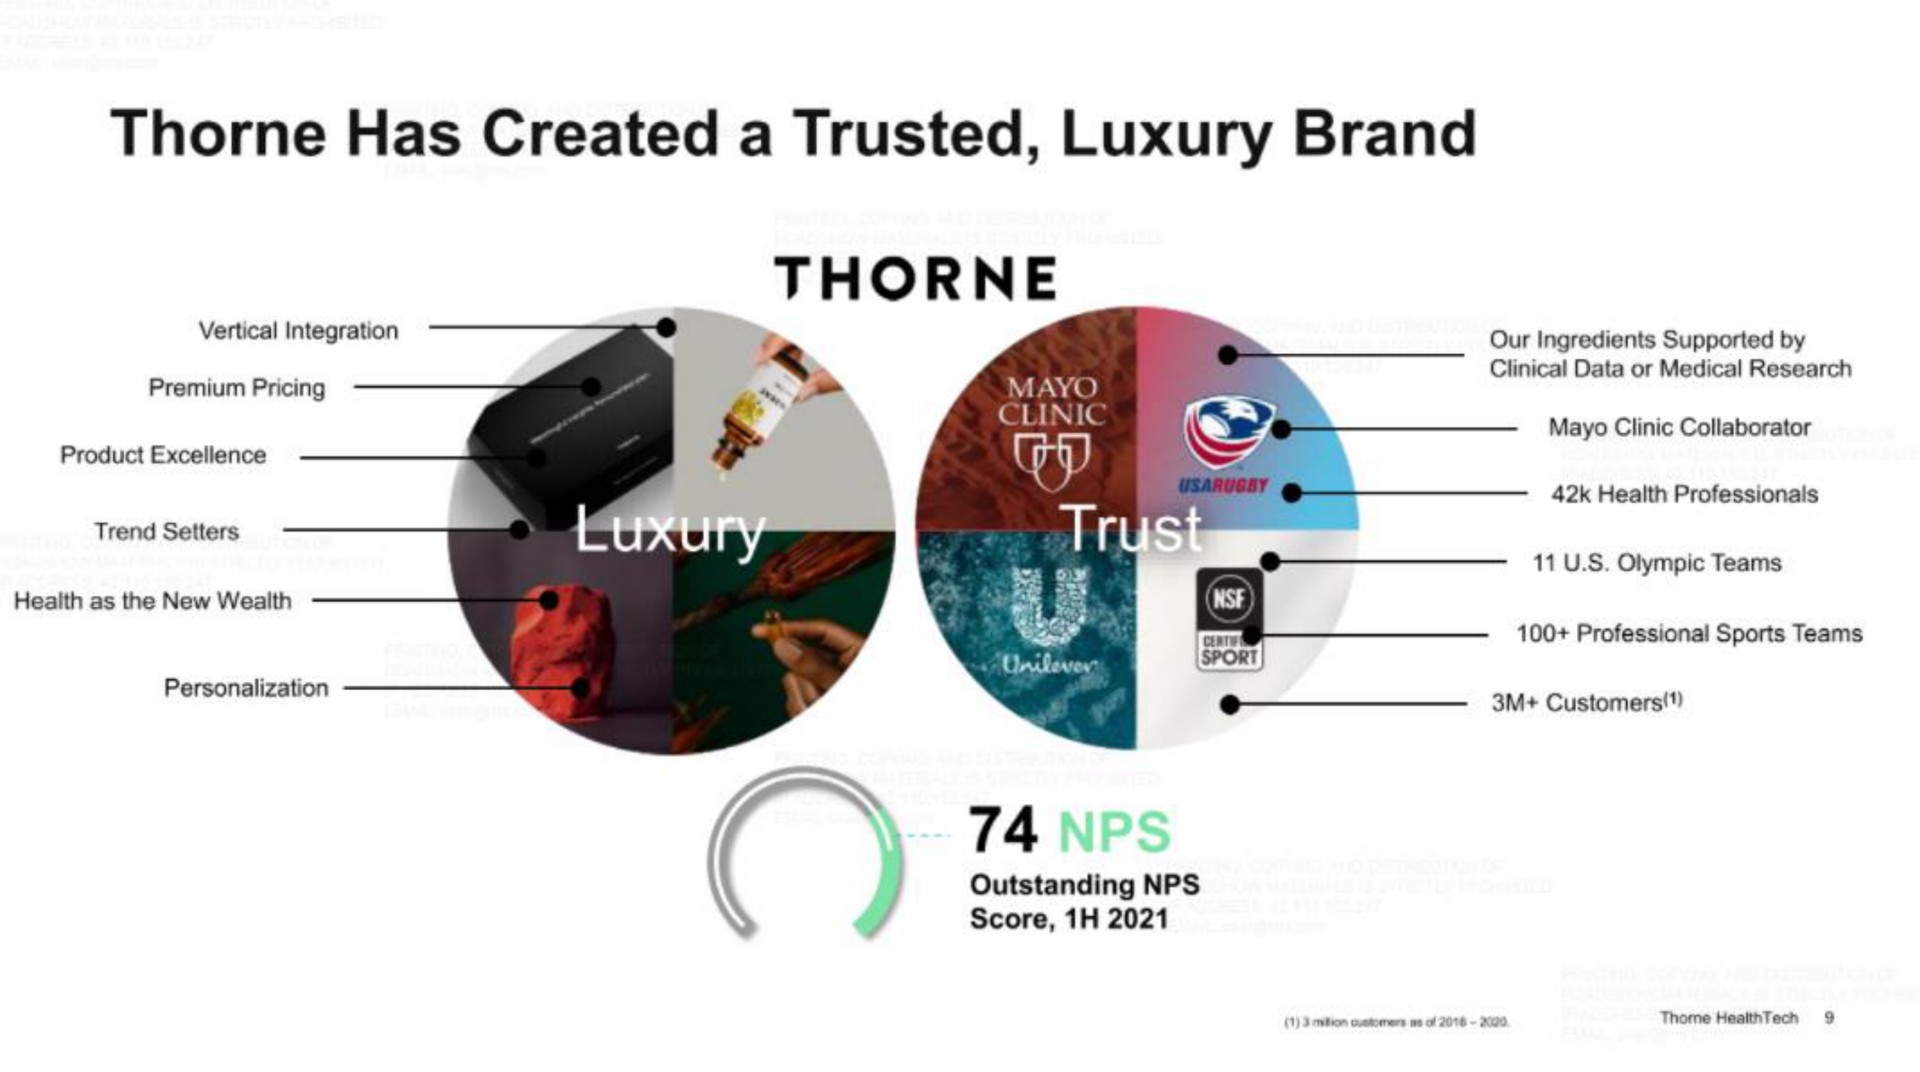 has created a trusted luxury brand | Thorne HealthTech